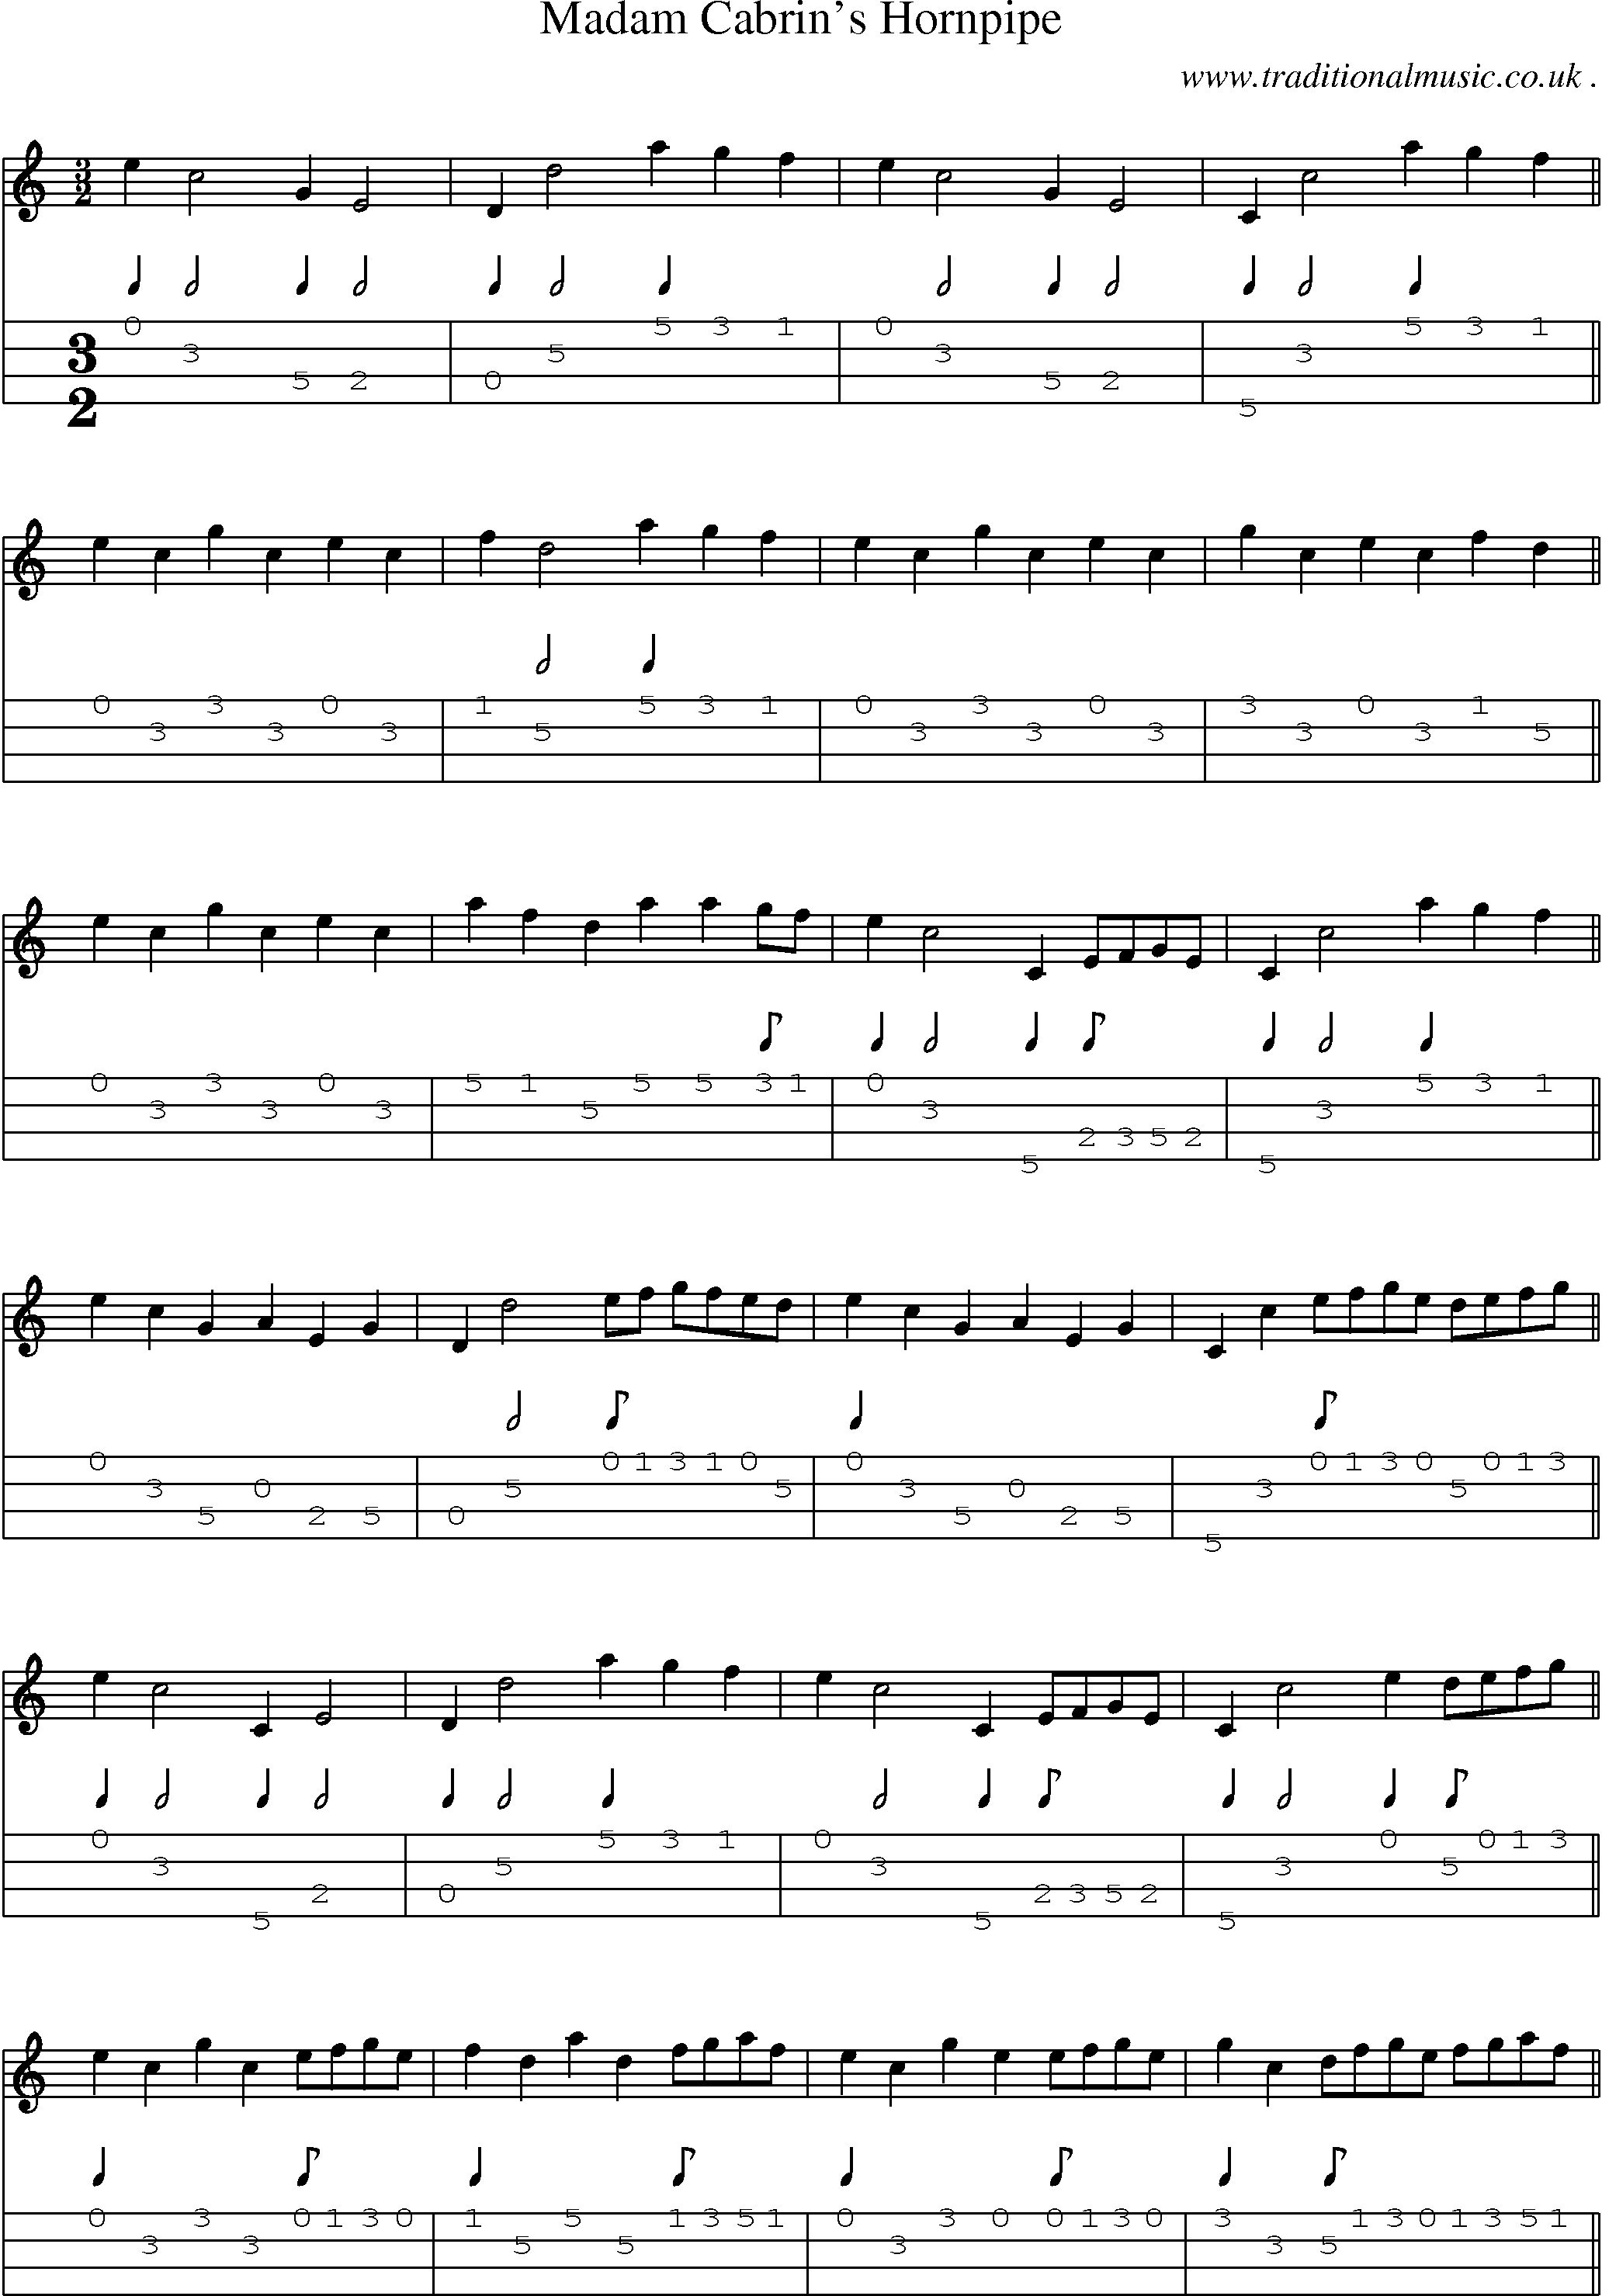 Sheet-Music and Mandolin Tabs for Madam Cabrins Hornpipe